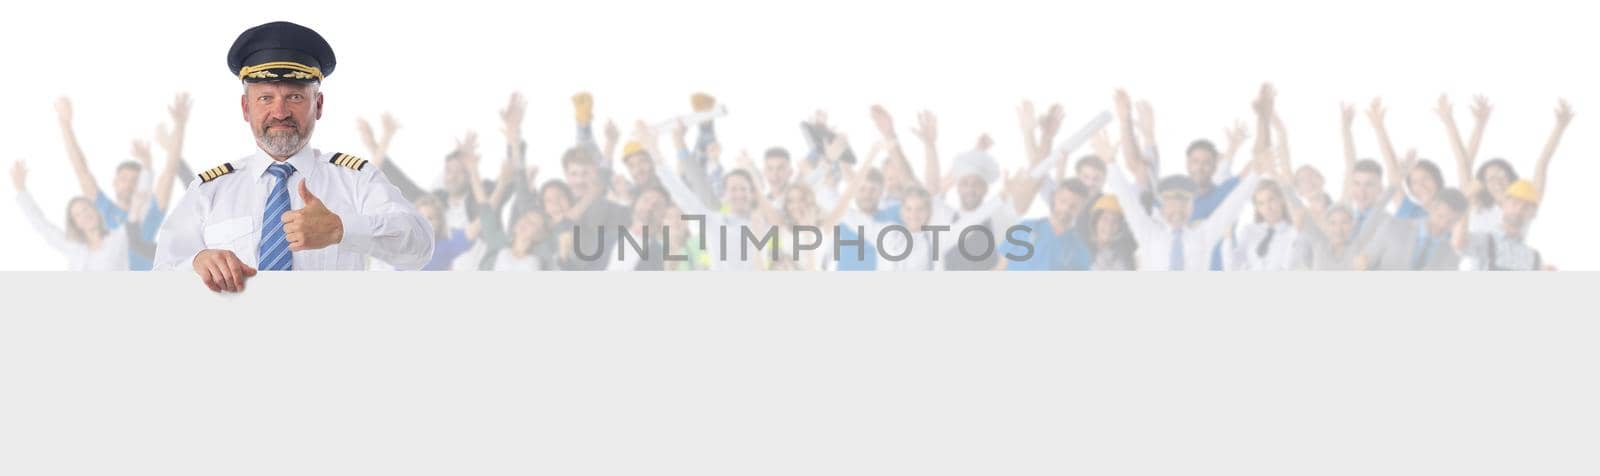 Photo of an airline pilot with thumbs up over many passengers isolated white background